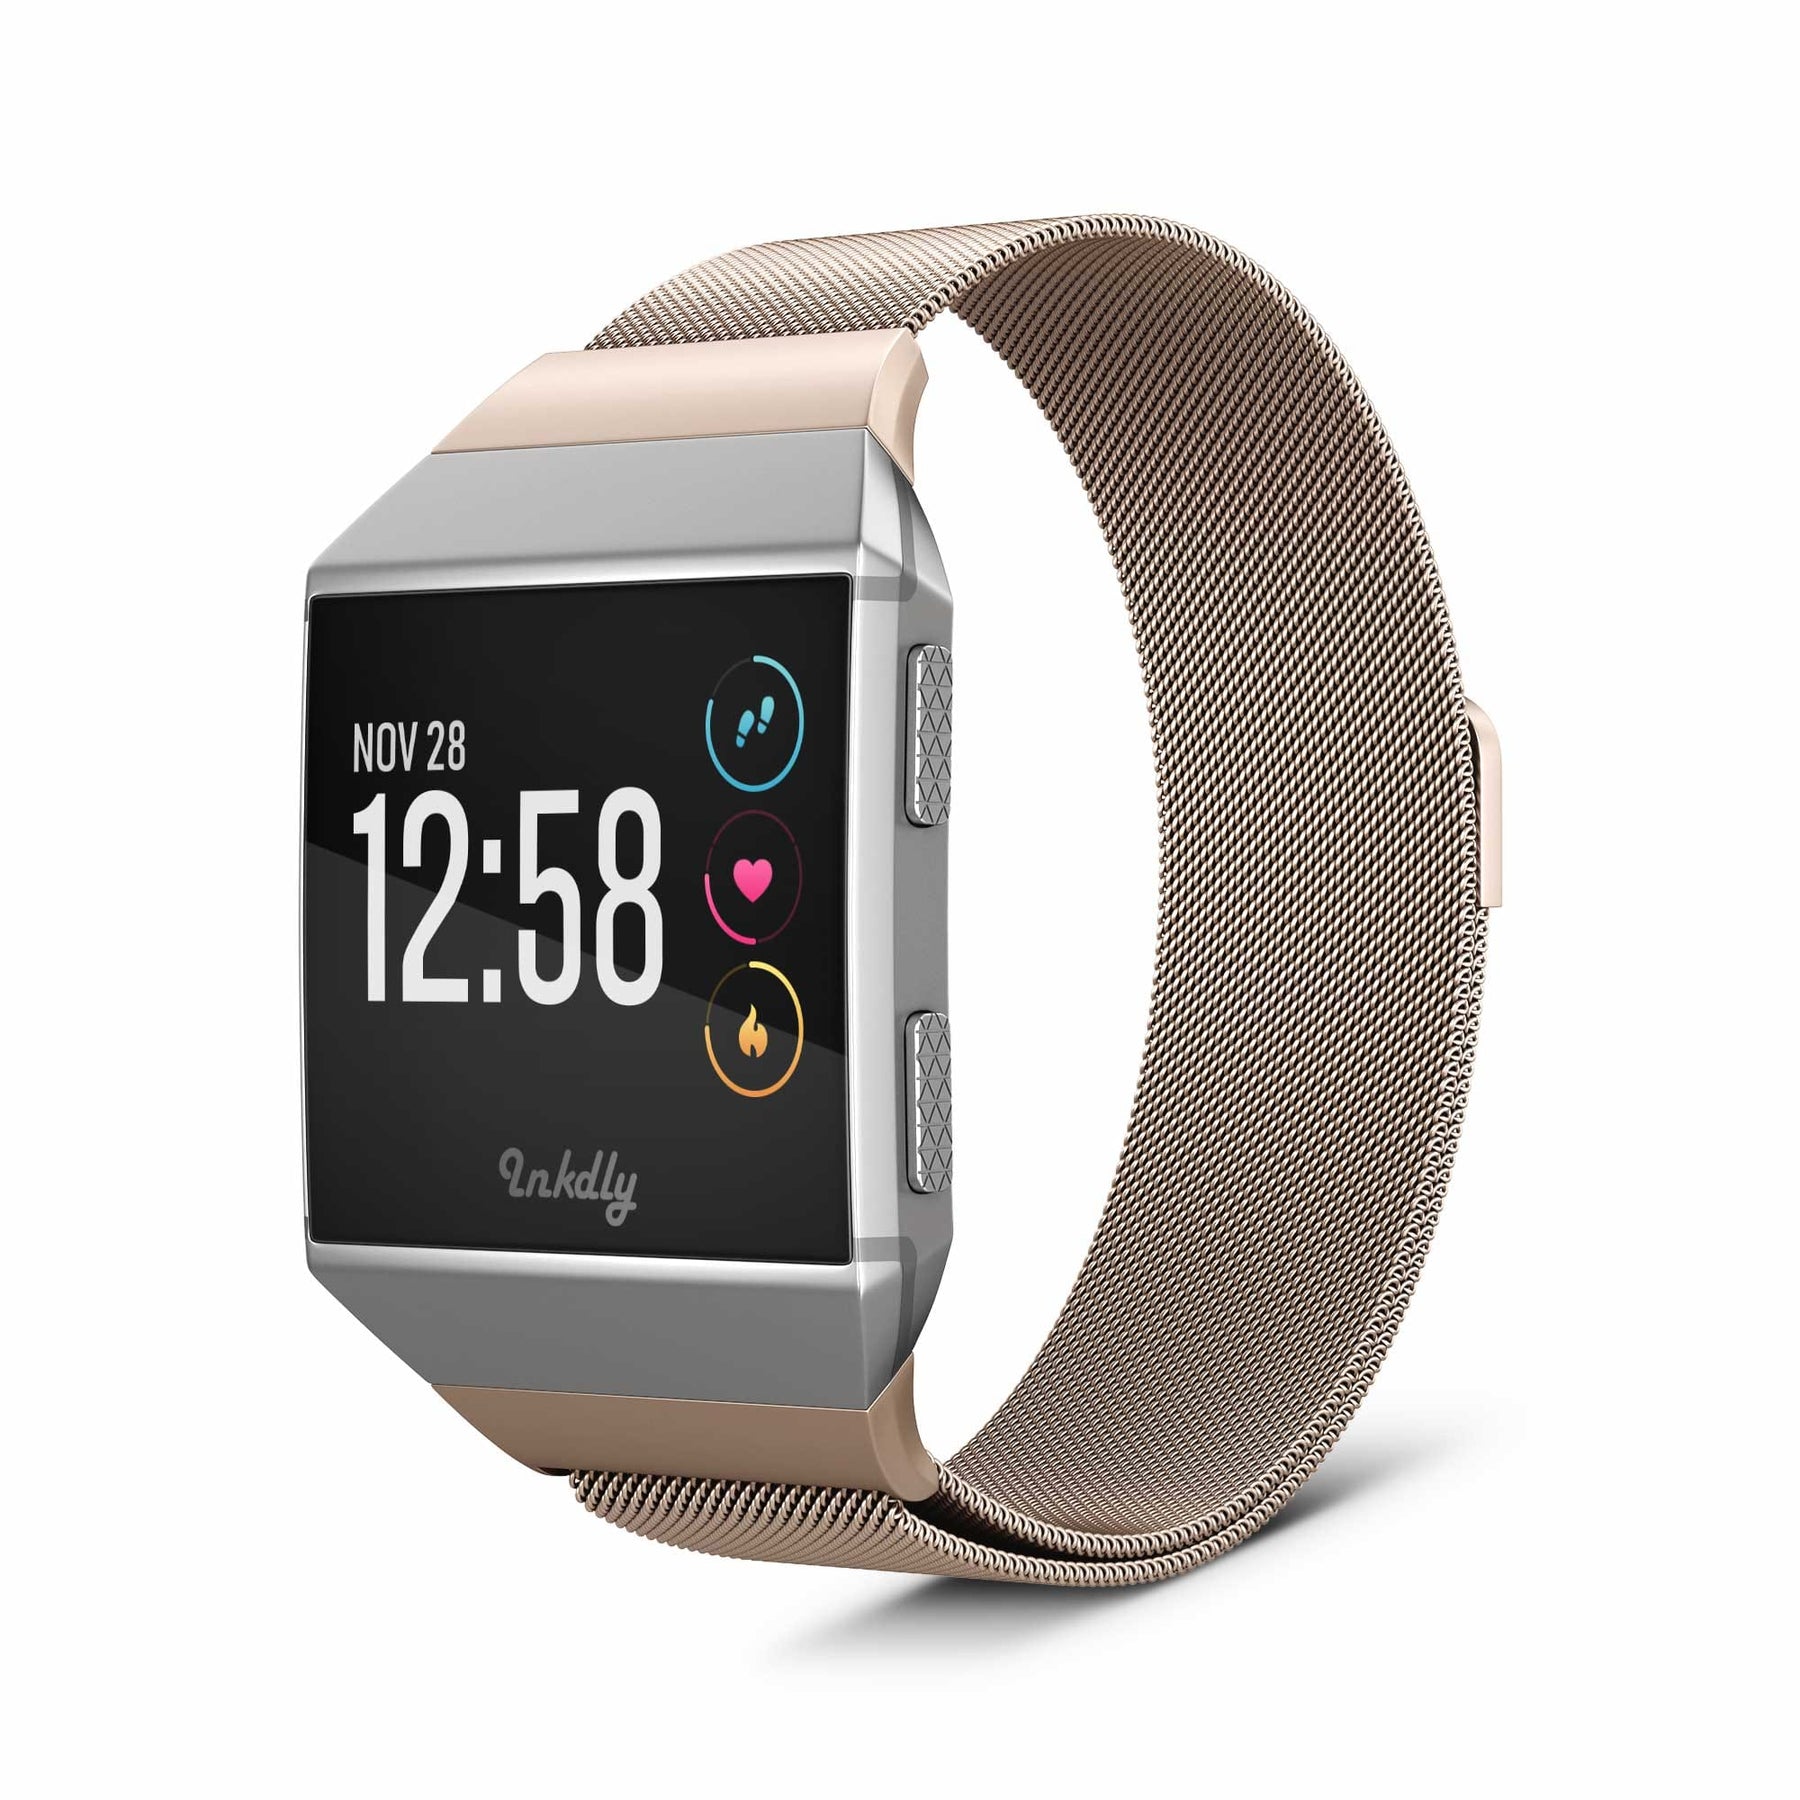 fitbit ionic gold